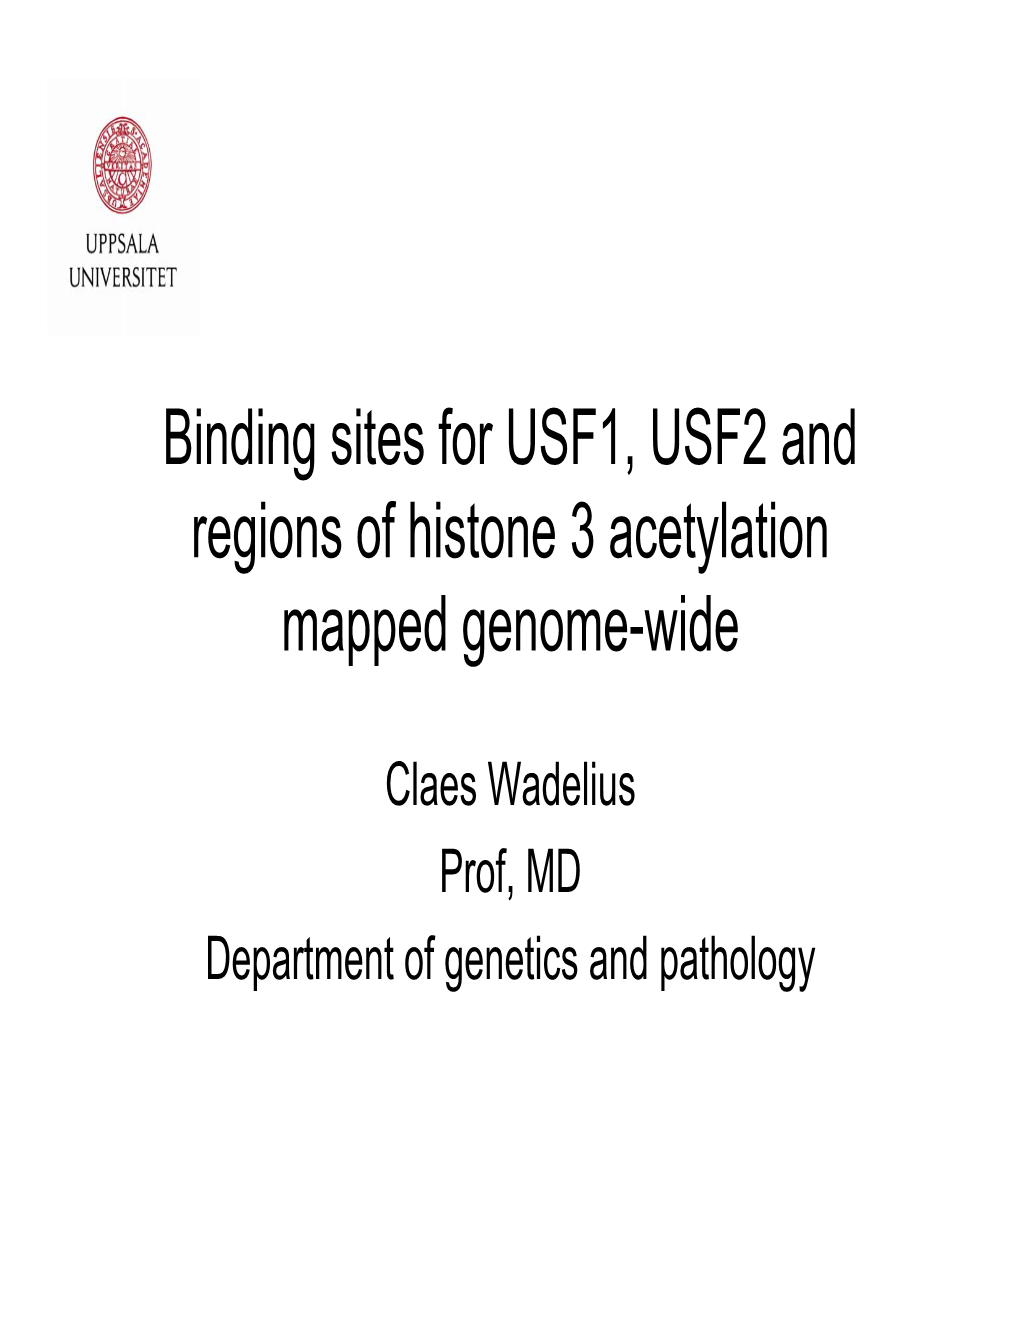 Binding Sites for USF1, USF2 and Regions of Histone 3 Acetylation Mapped Genome-Wide